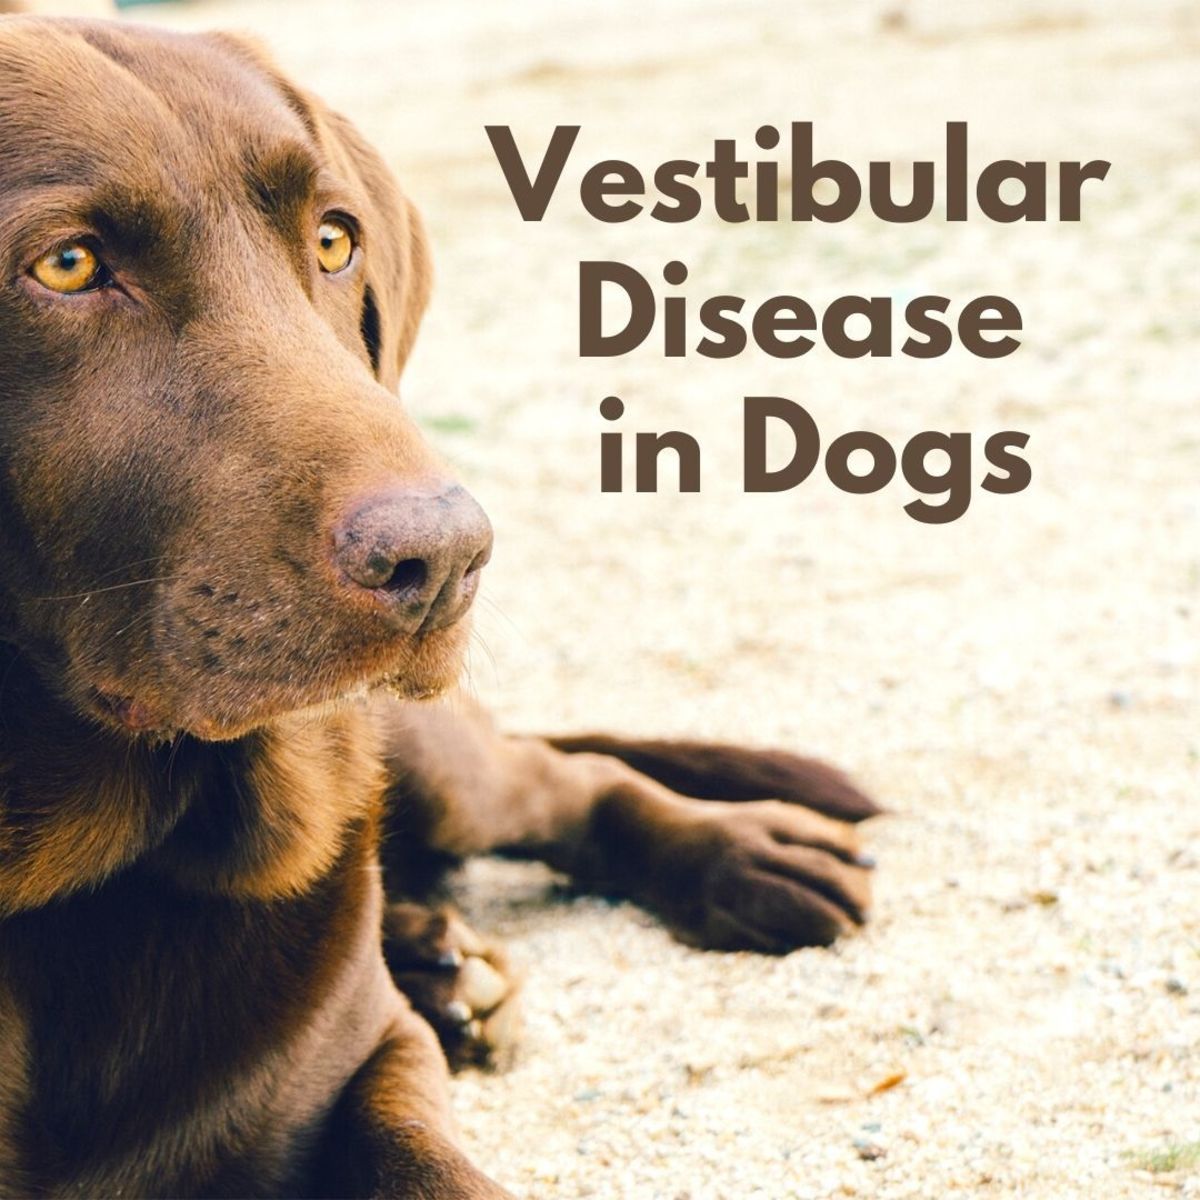 Is your dog walking with an uncoordinated, drunk-like gait? This may be a sign of vestibular disease.